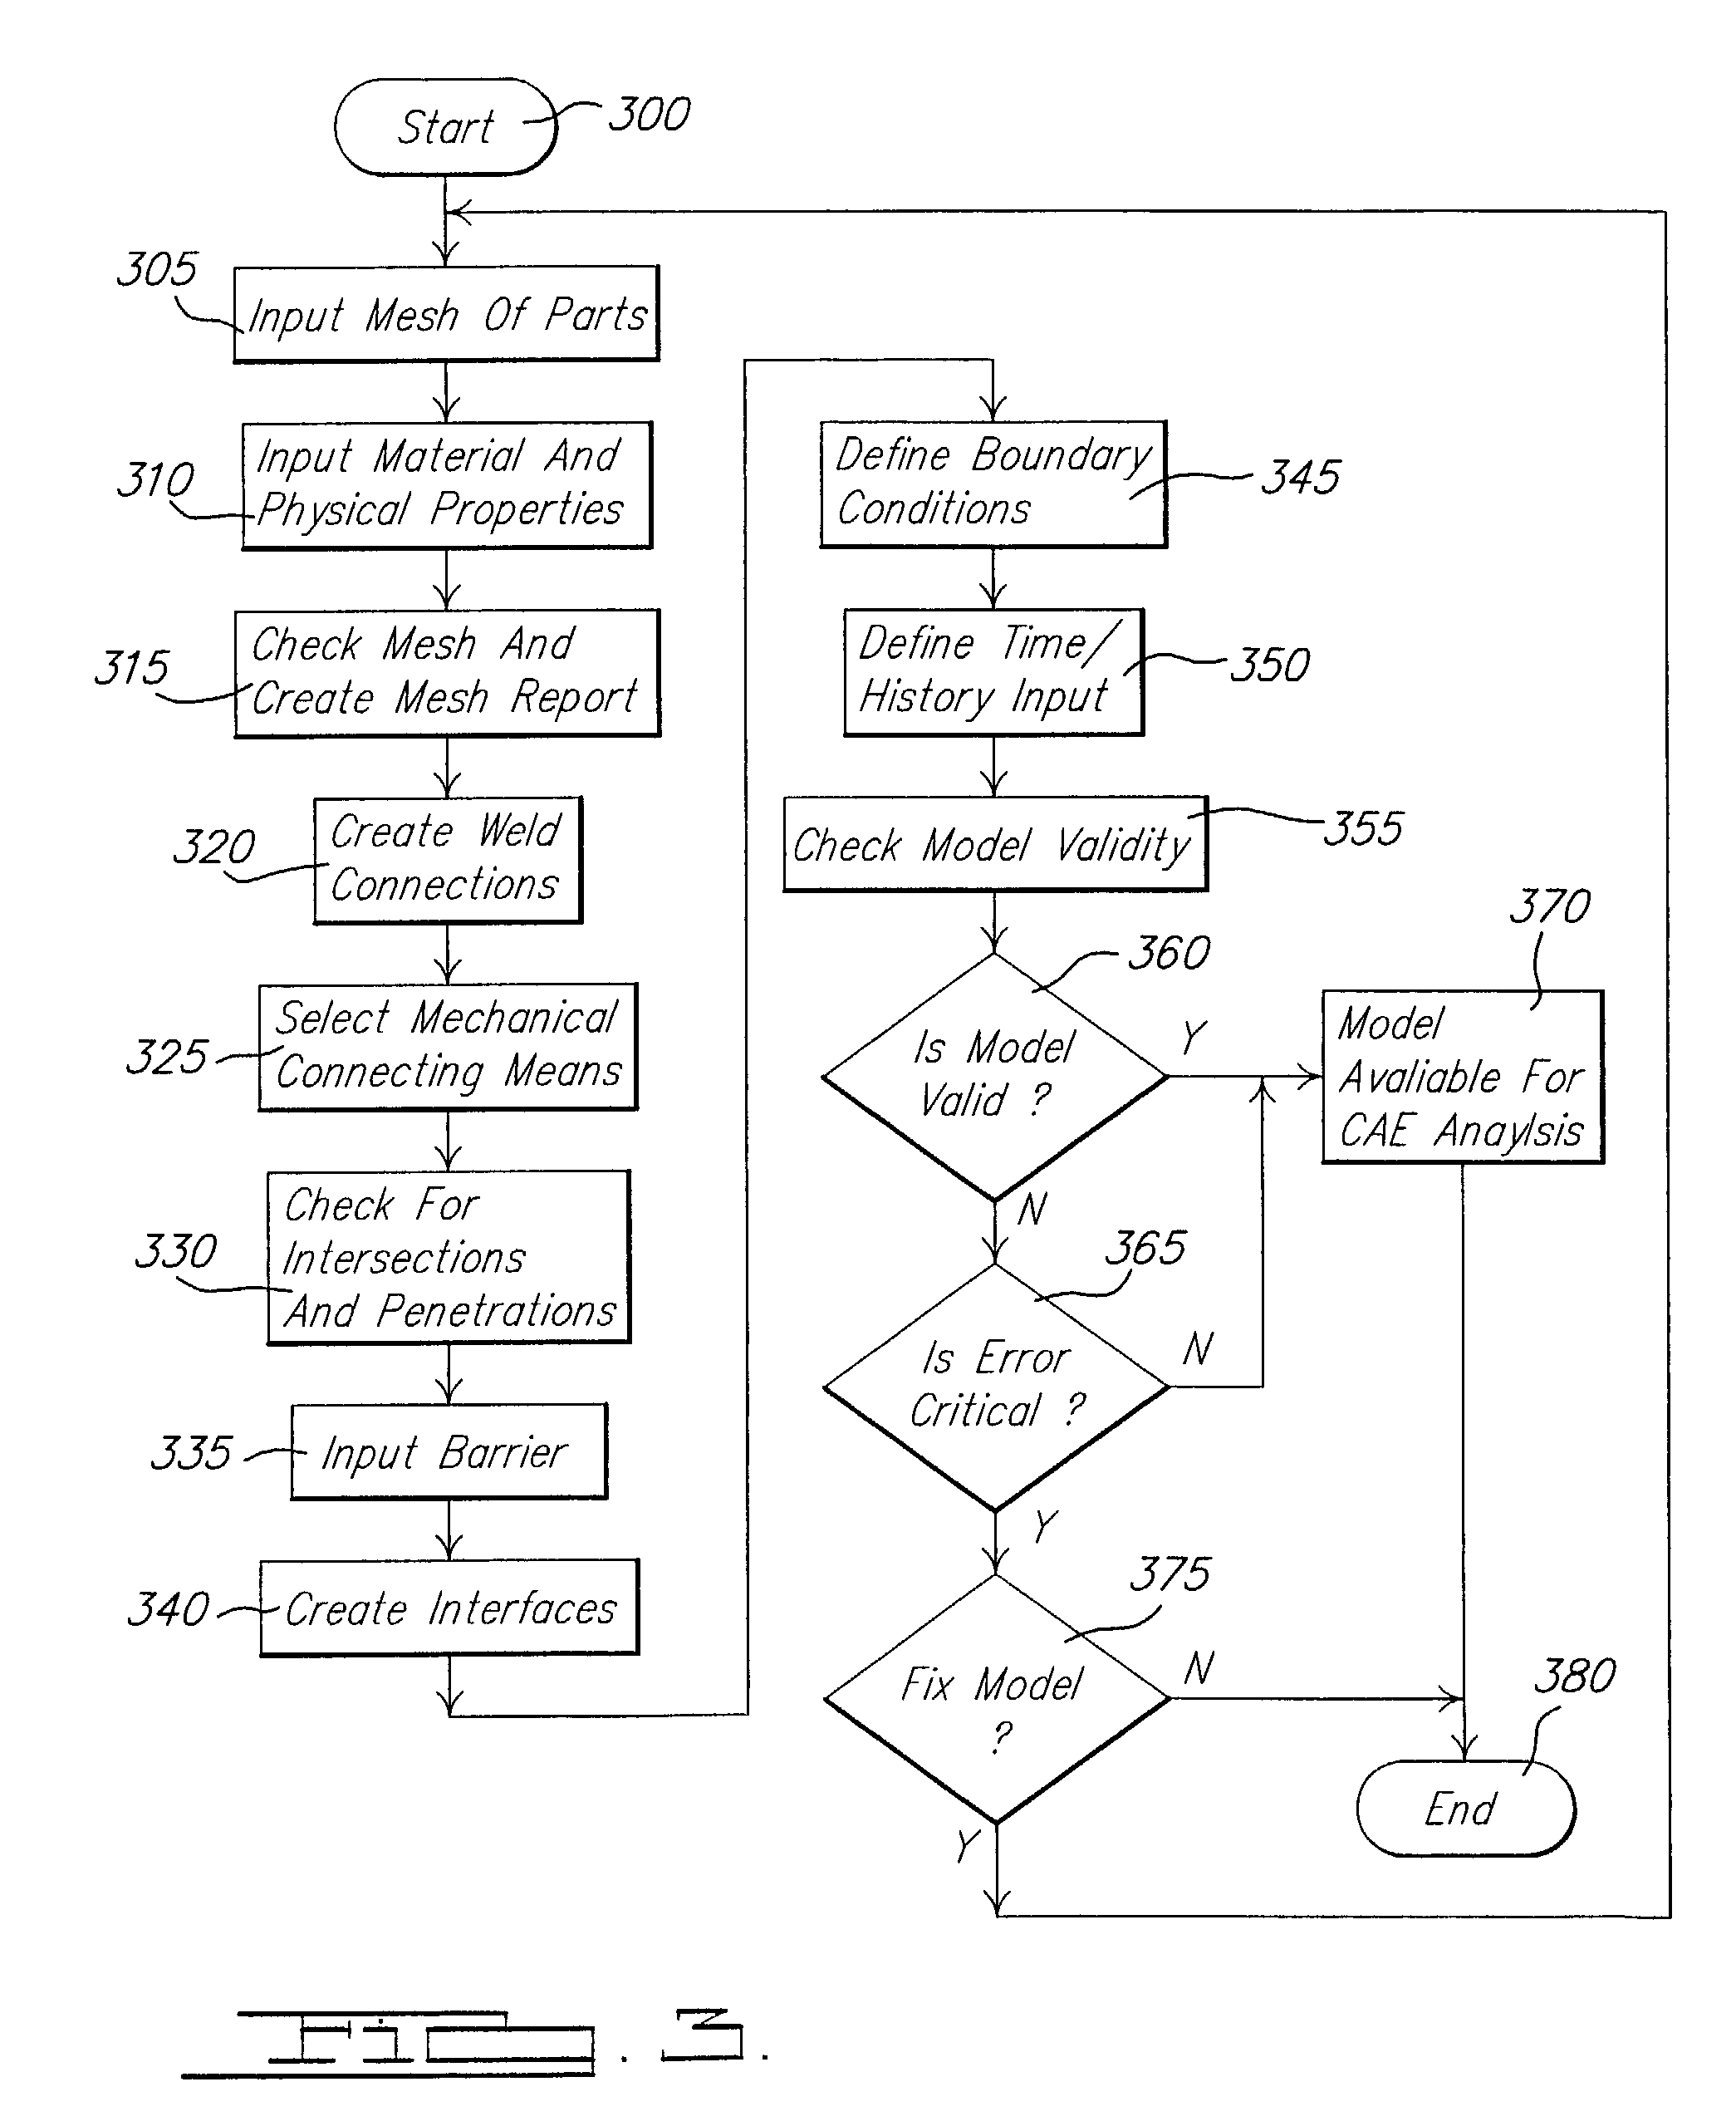 System and method of interactively assembling a model